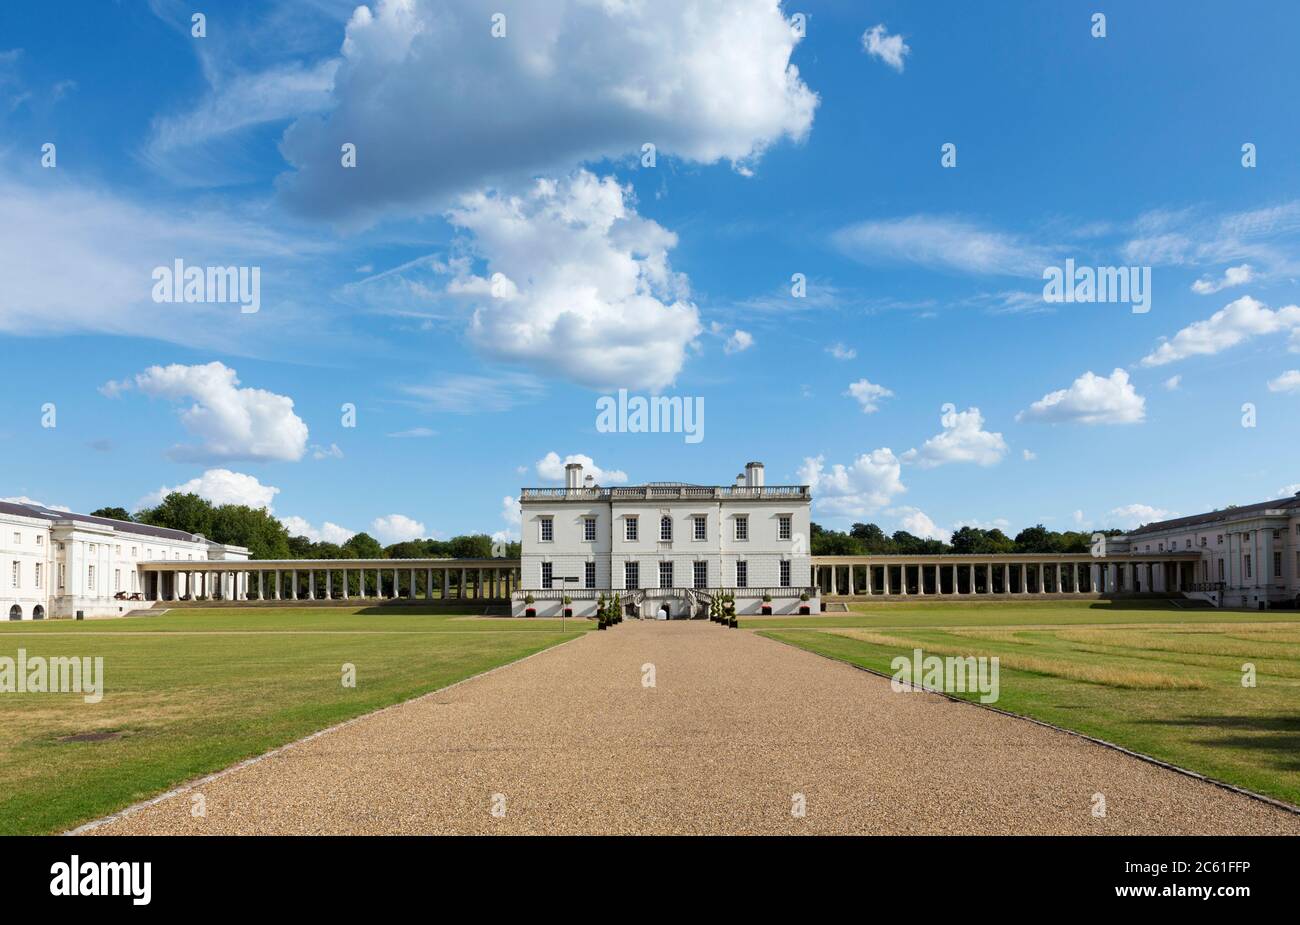 UK, London, Greenwich. The Queens House by Inigo Jones, built between 1616 & 1635. The first building in the neoclassical Palladian style in Britain Stock Photo